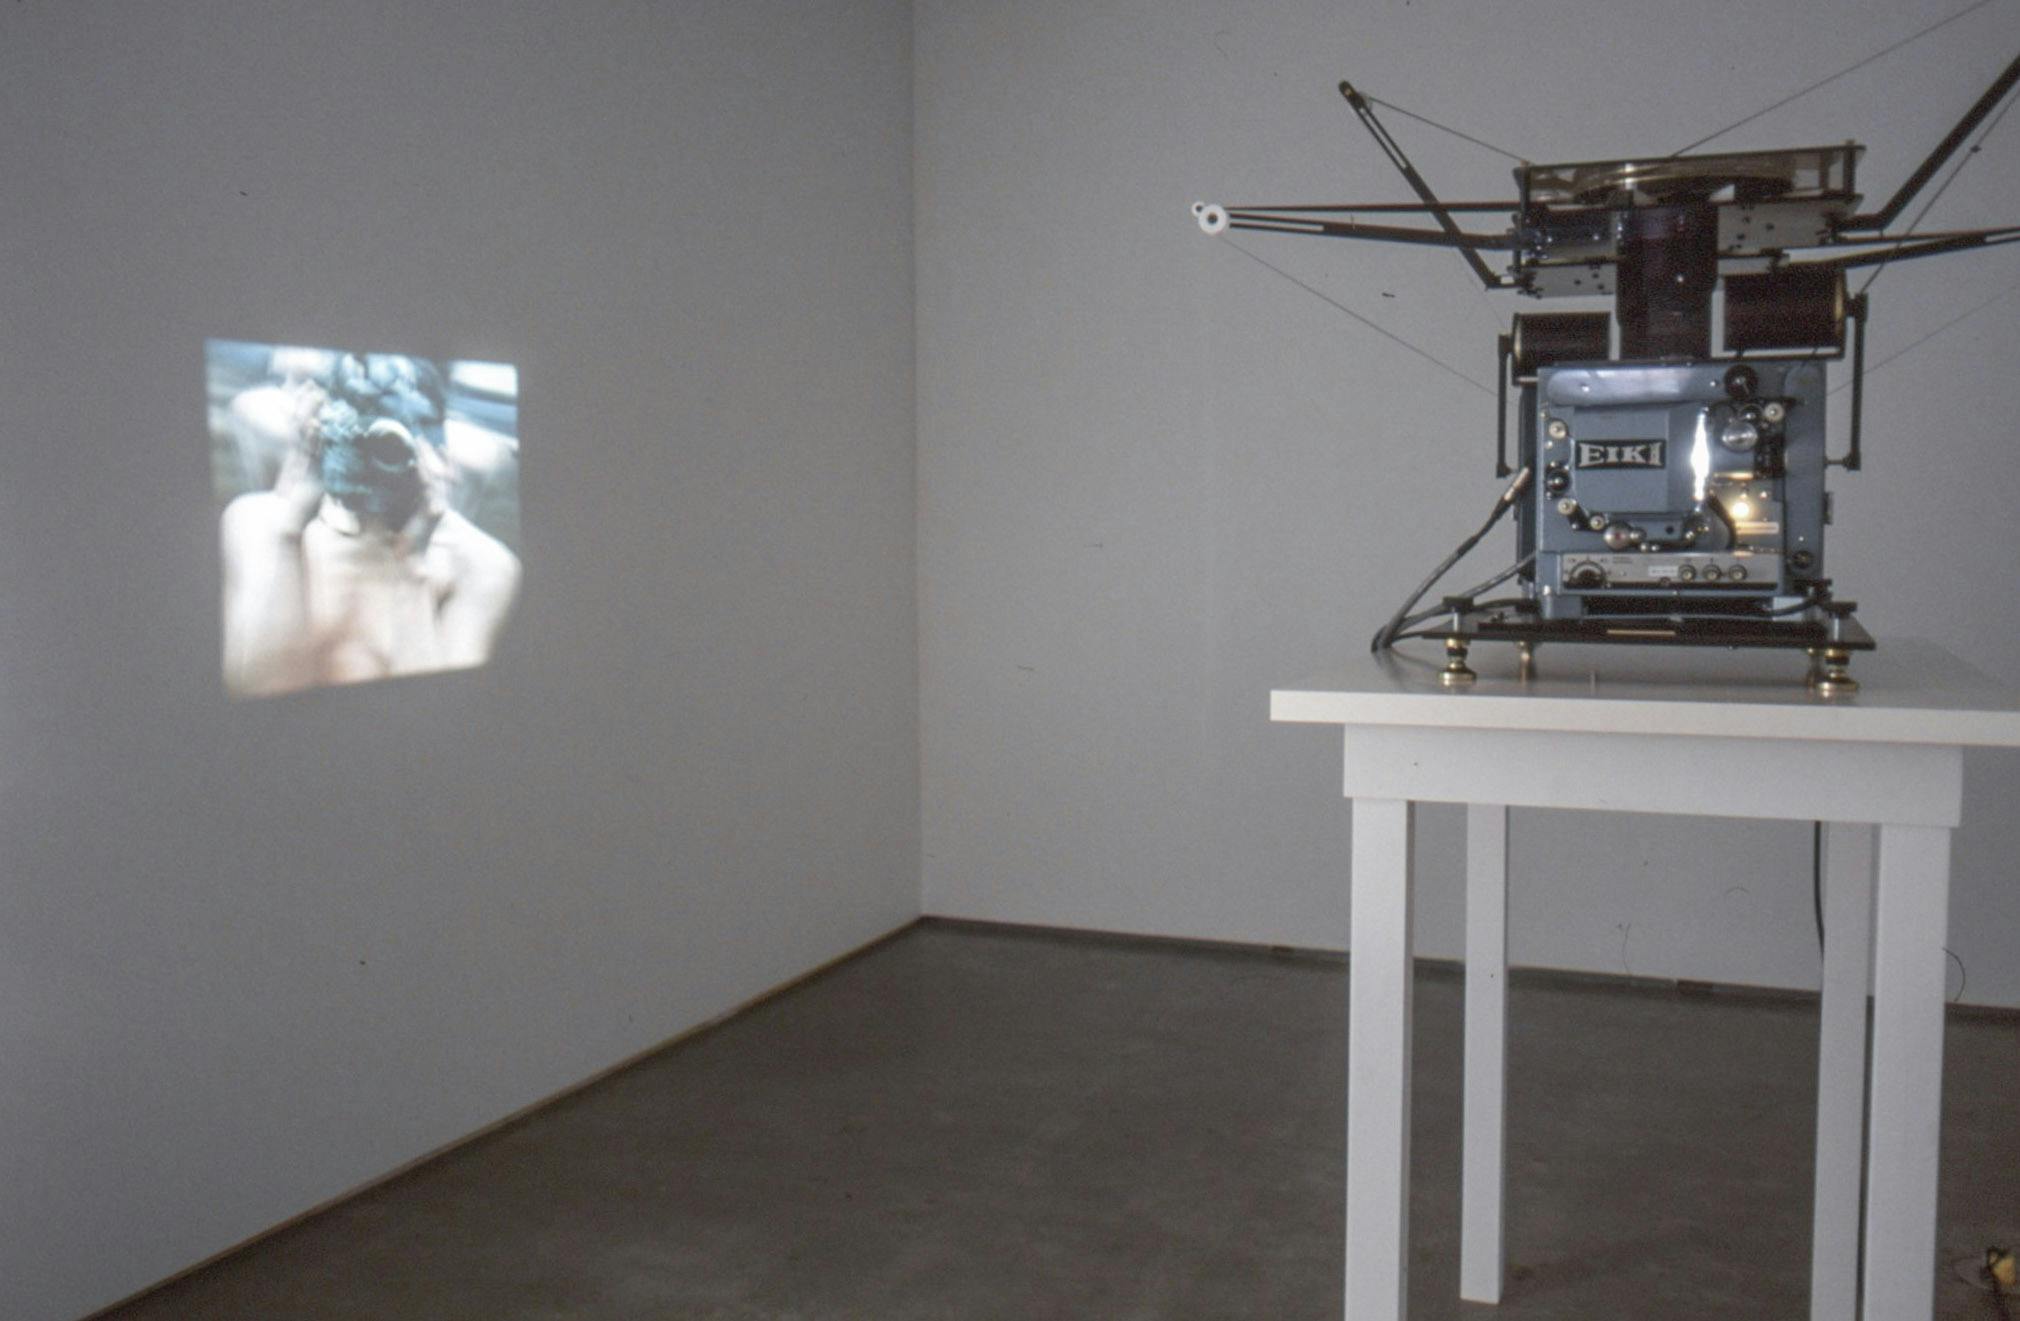 A silver film projector is placed on a white table. It projects a film on a gallery wall. The projected blurred image depicts a hand and a green coloured large insect-like shaped object. 